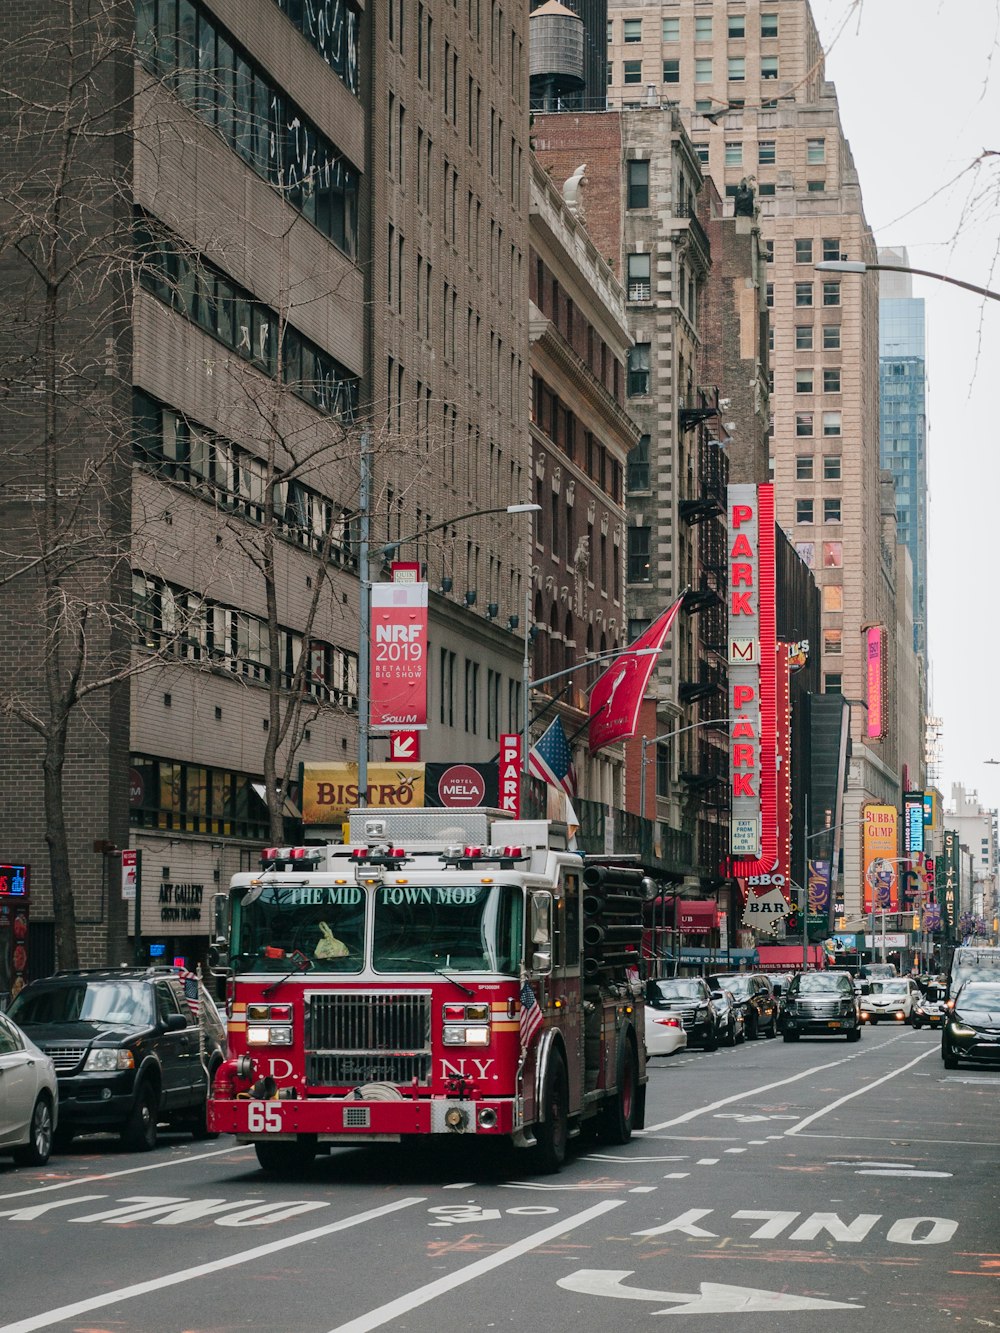 a red fire truck driving down a street next to tall buildings